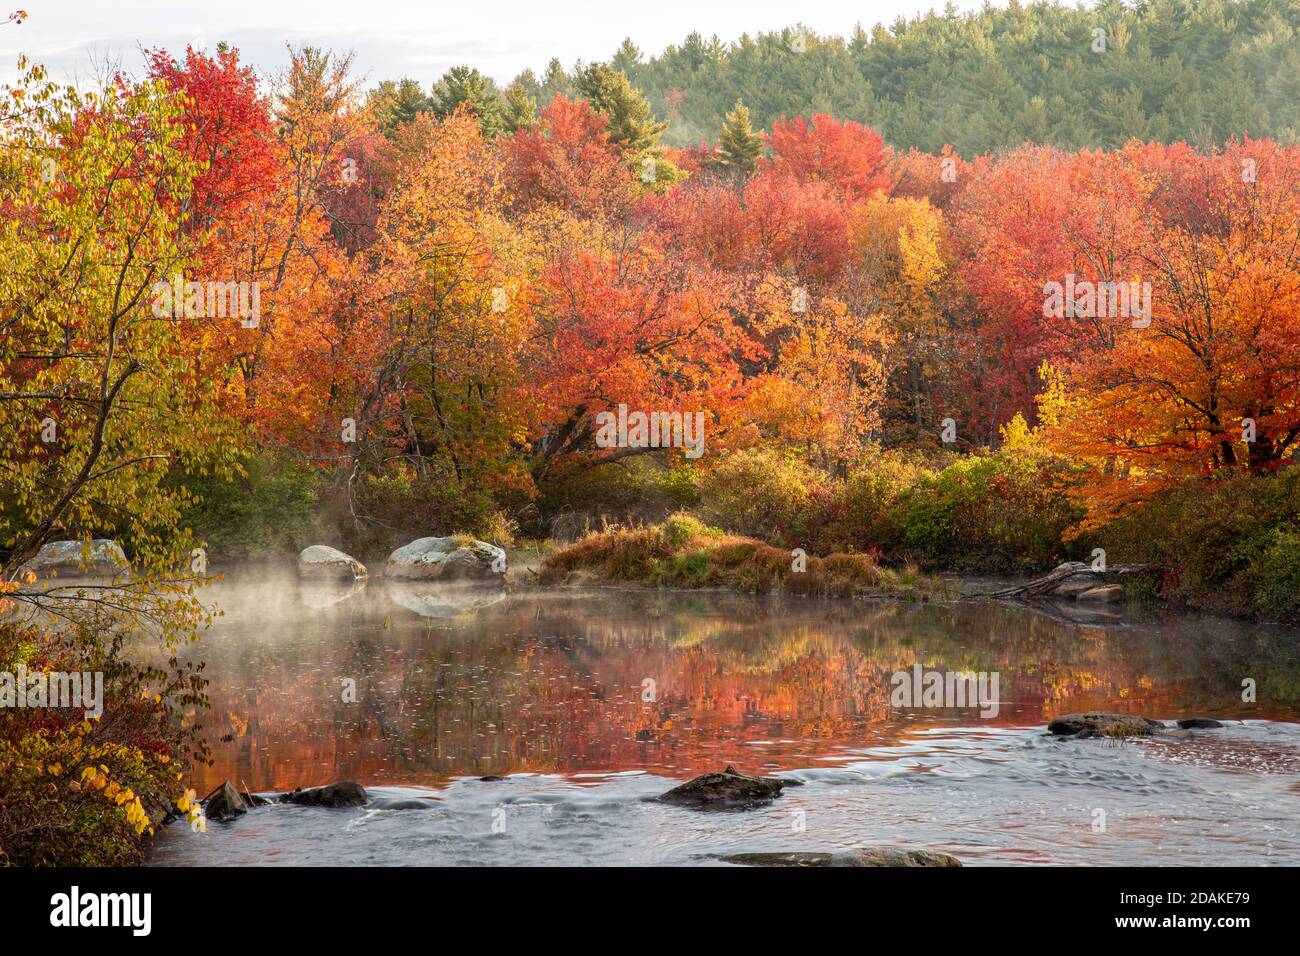 The Millers River in Royalston, Massachusetts as it runs through the Birch Hill Reservation Stock Photo